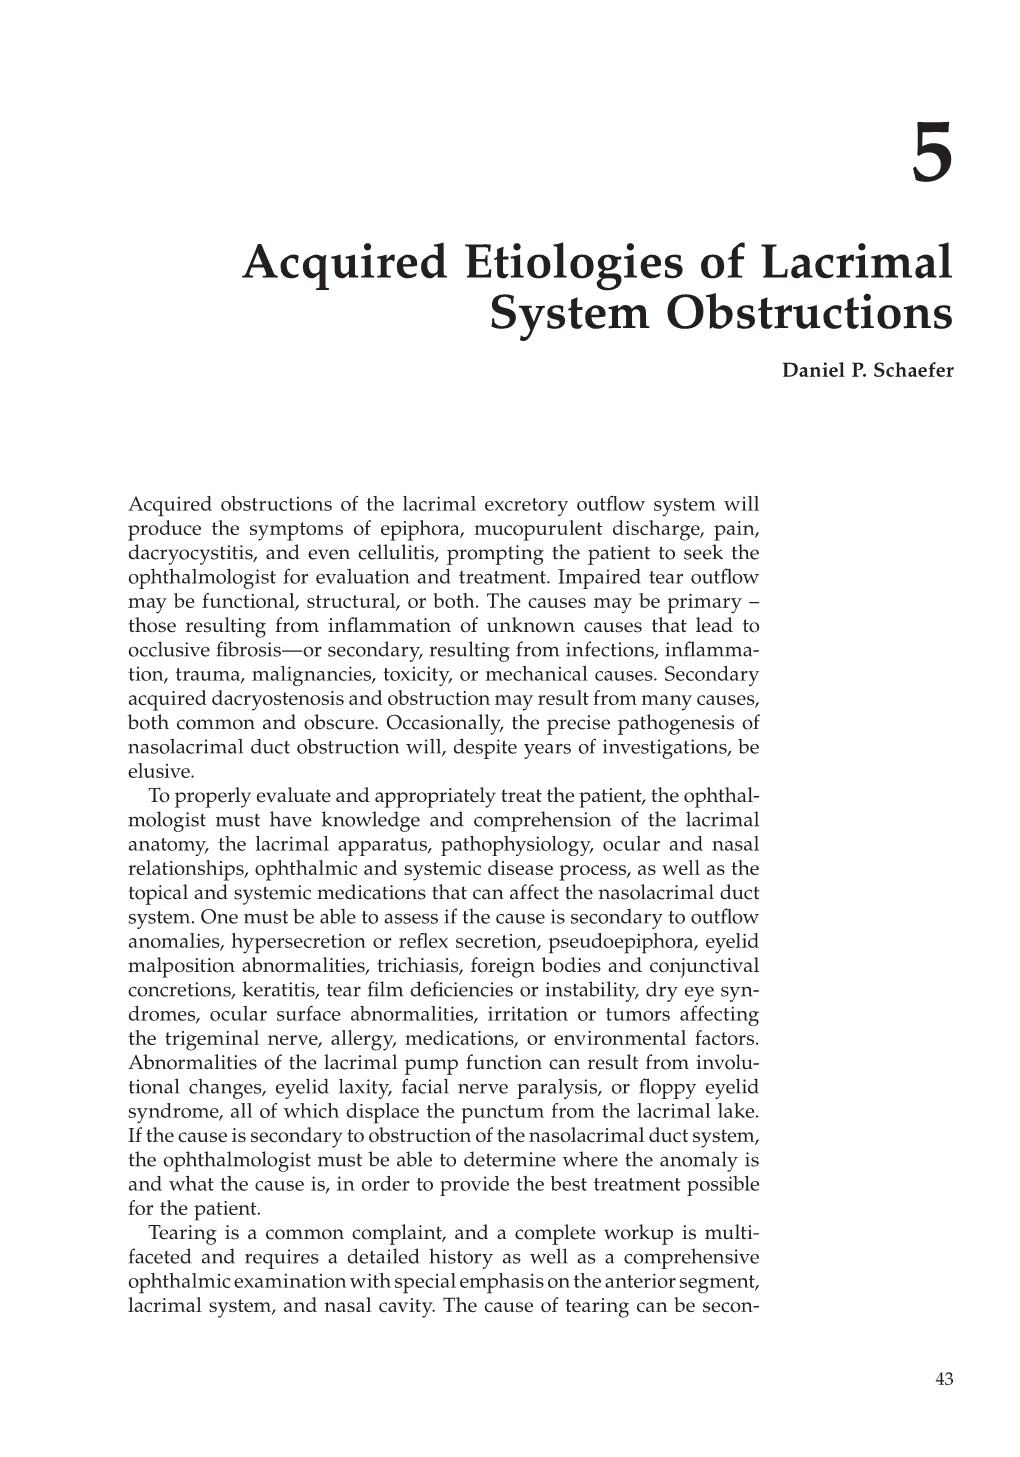 Acquired Etiologies of Lacrimal System Obstructions